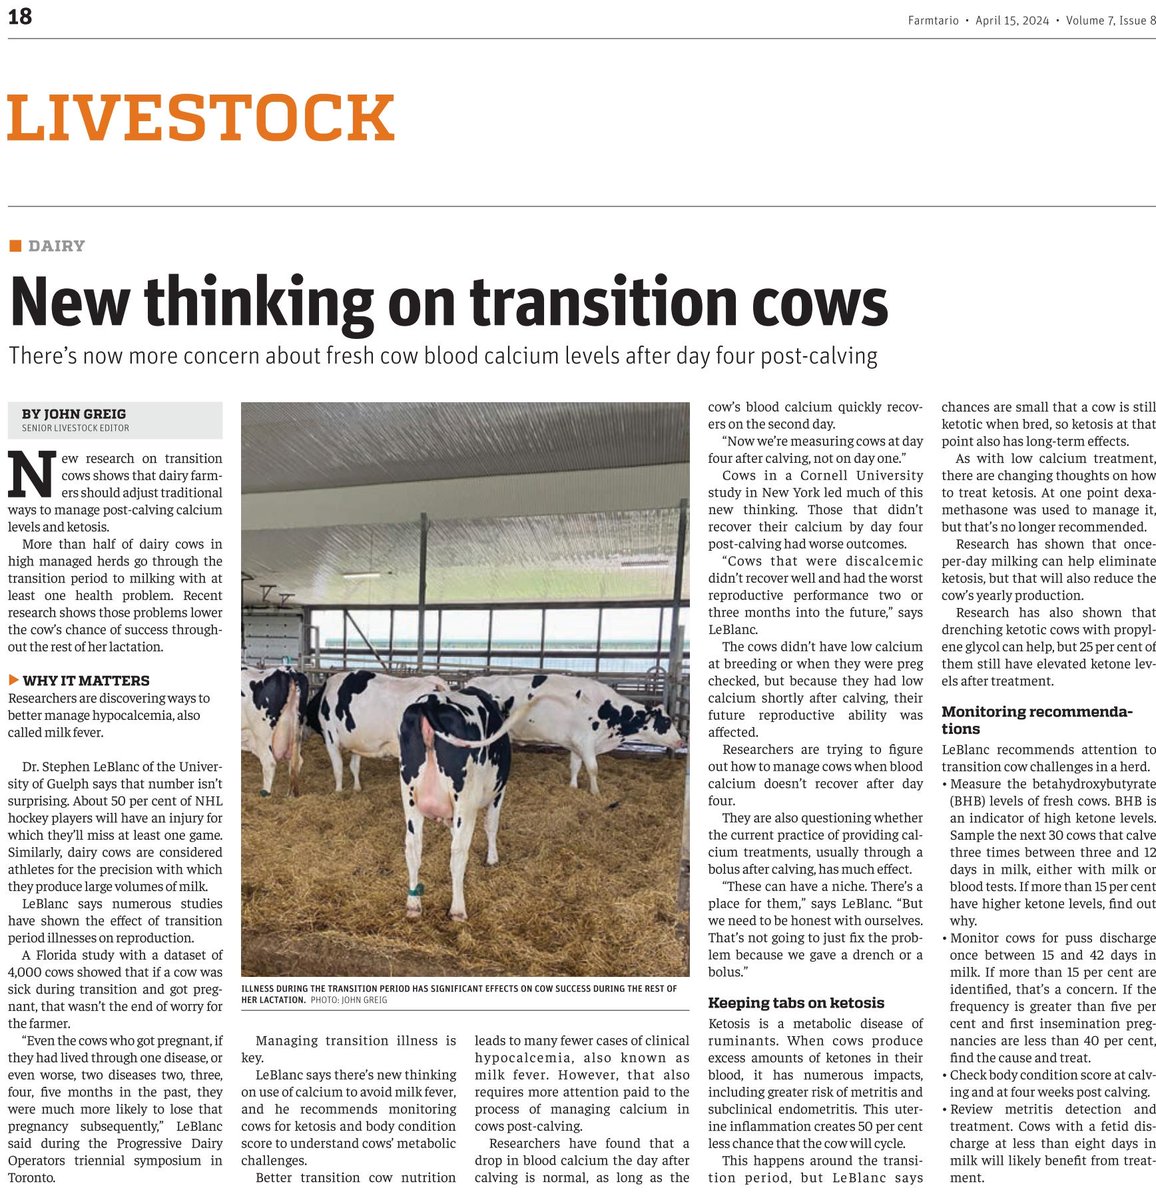 Story in @farmtario from @PDODairy Symposium on transition period research and monitoring from Stephen LeBlanc @dairyresearch1 edition.pagesuite.com/html5/reader/p…